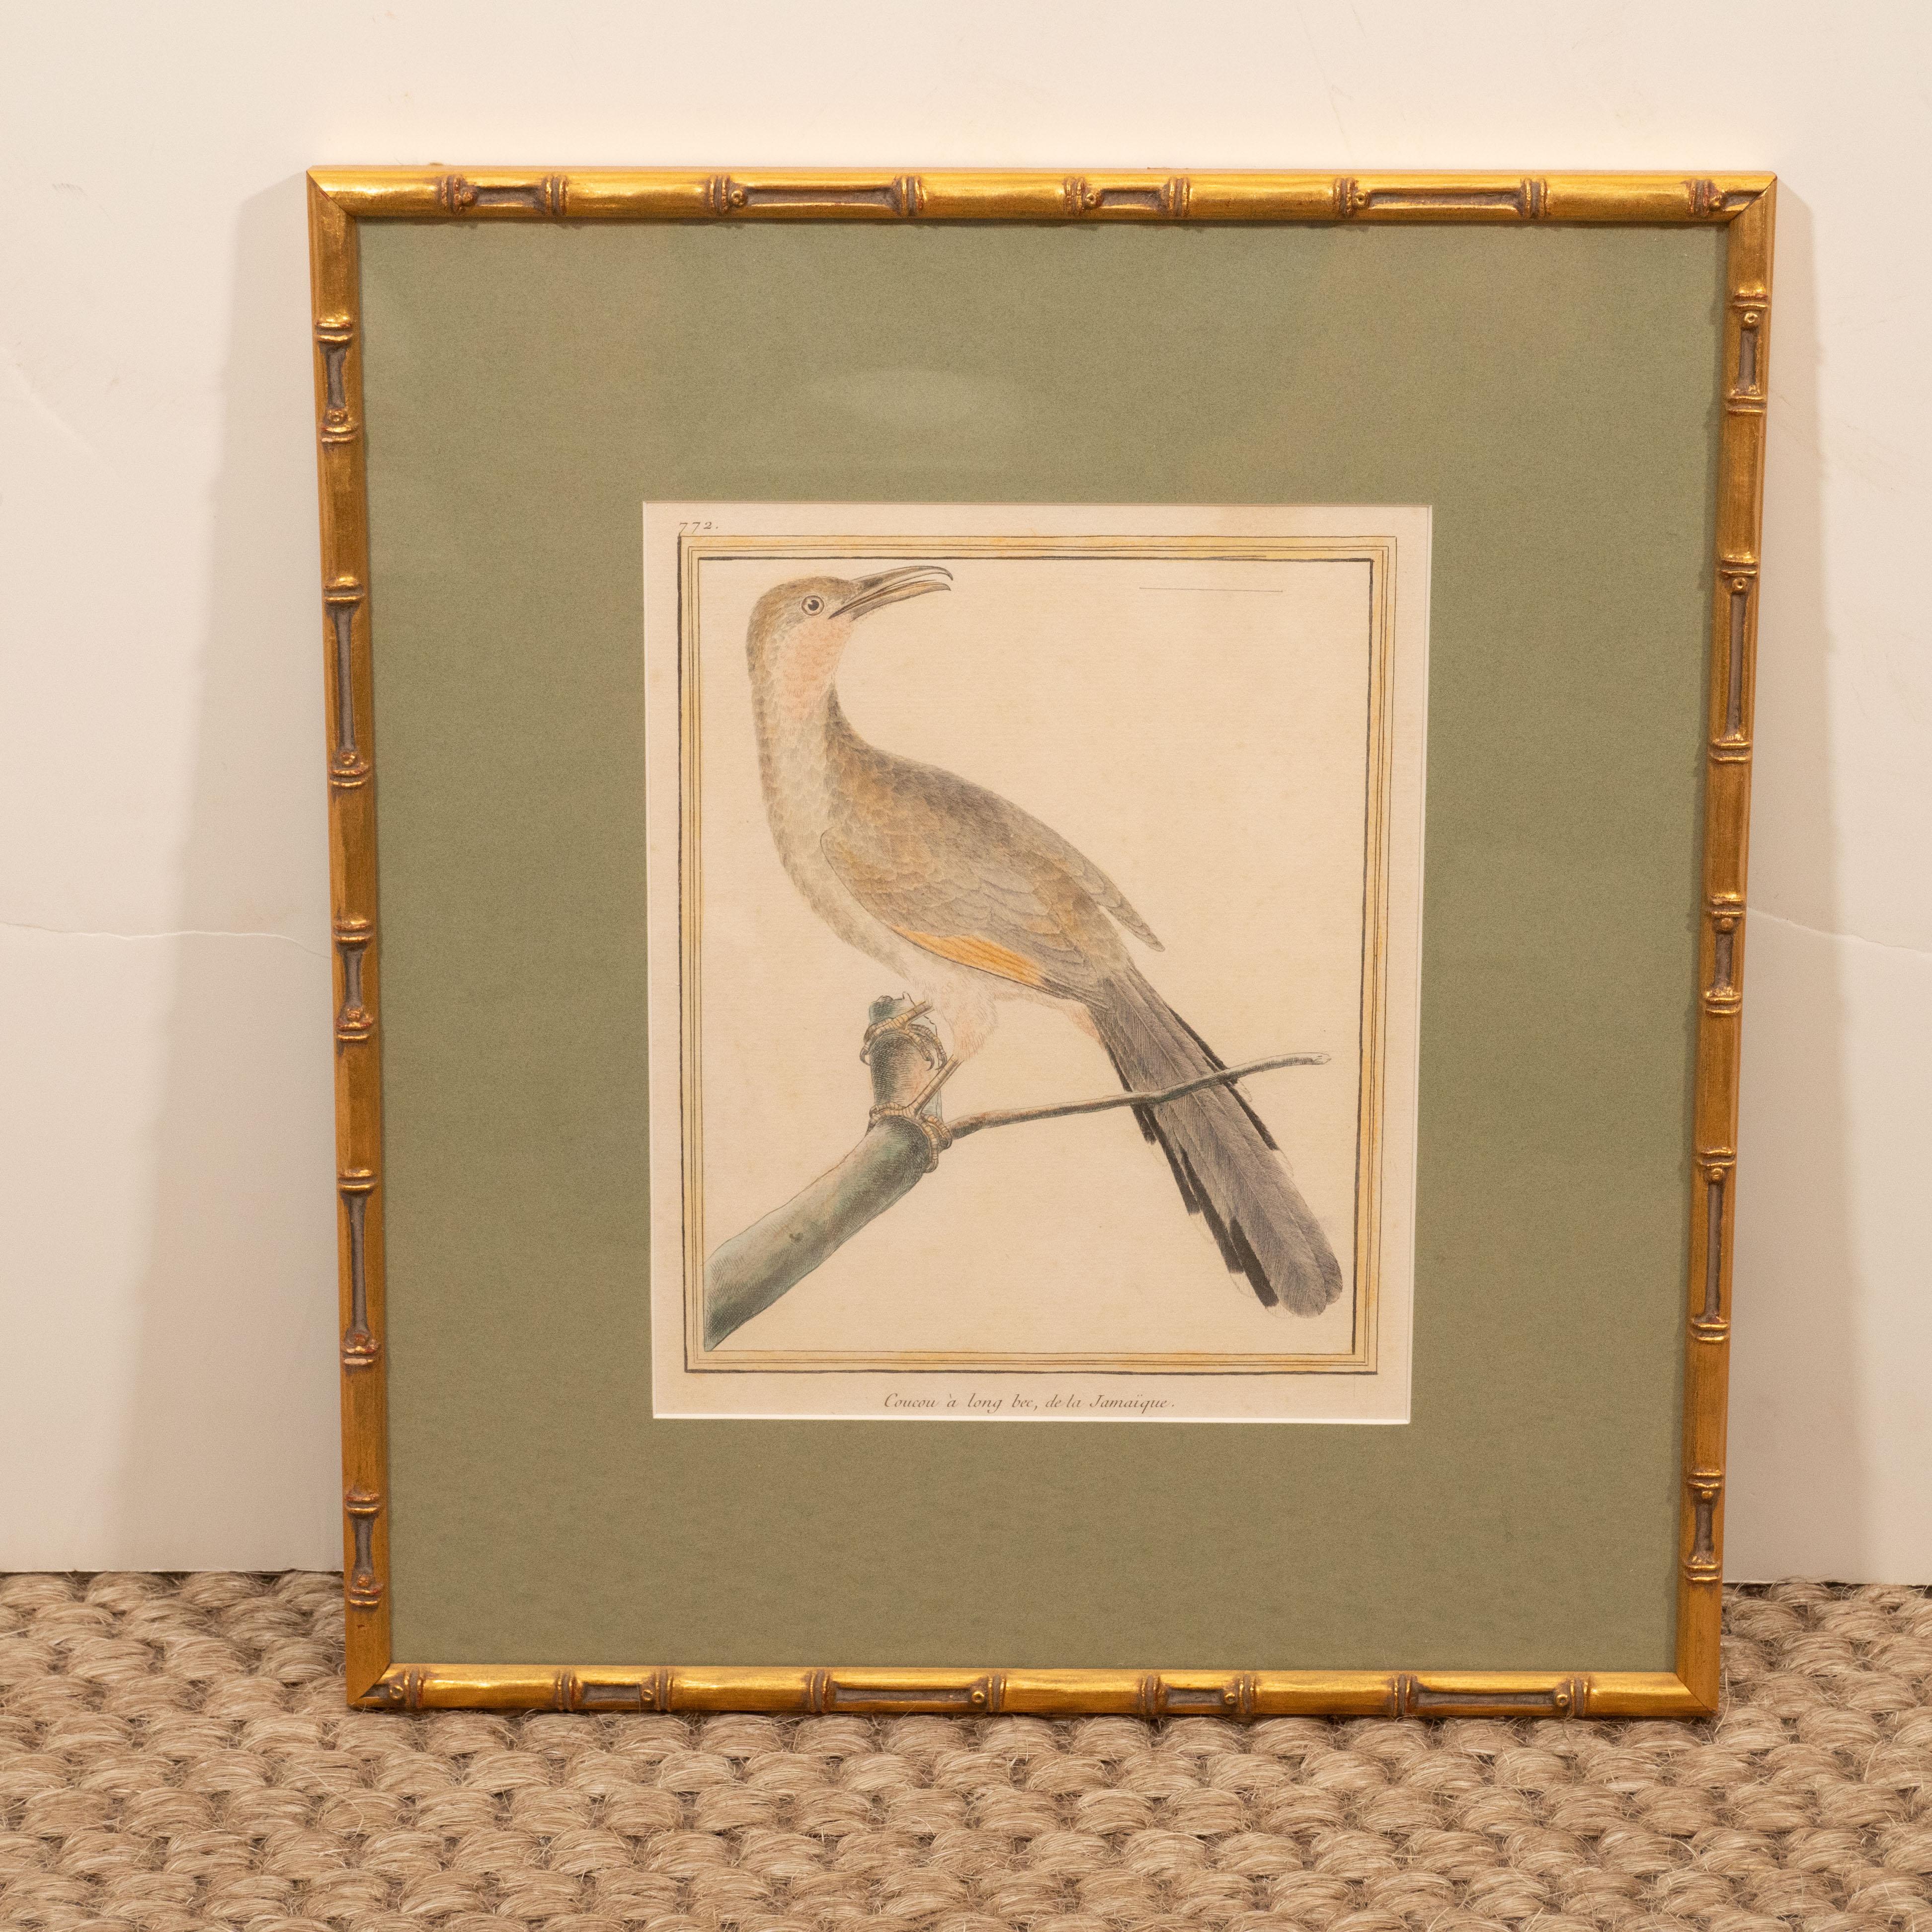 The exquisite detail and rich, saturated color make these bird engravings stand apart from others. Dating from the 18th century, these hand colored engravings from France are matted and framed in faux bamboo gold frames. A great way to add color and